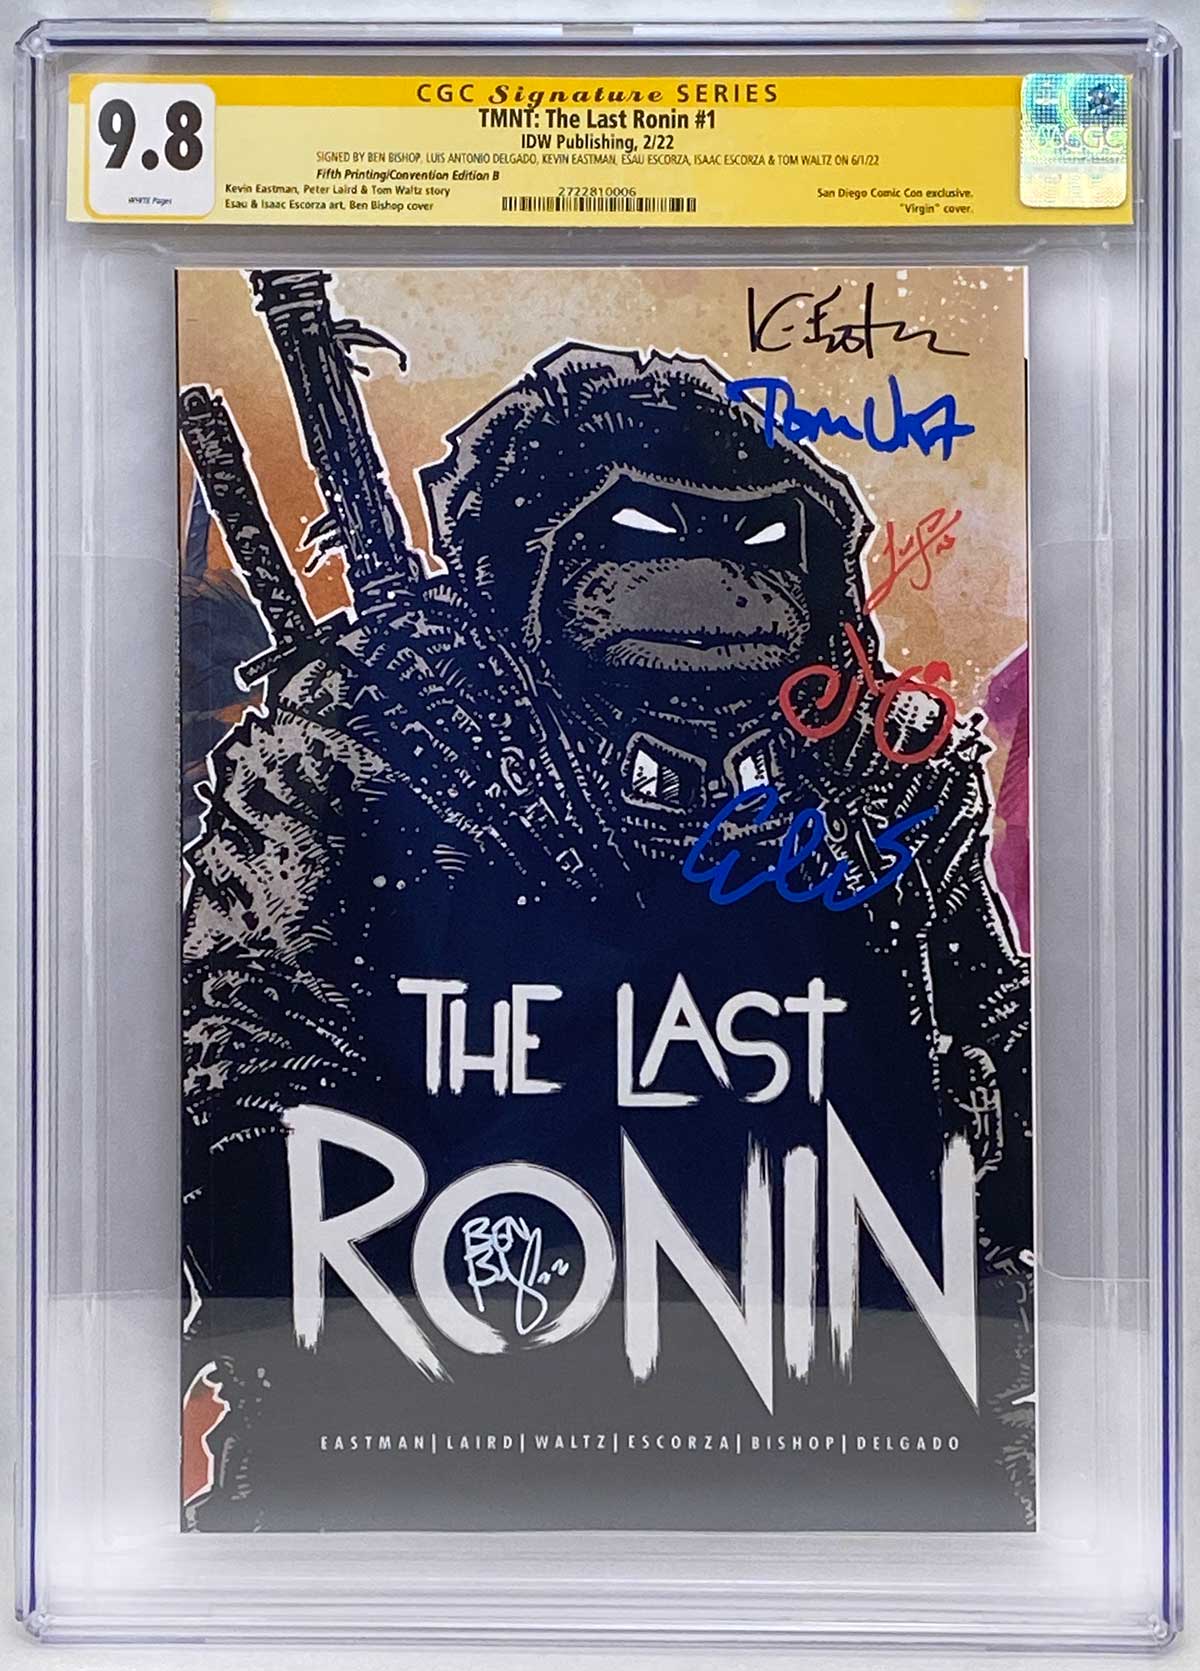 TMNT: THE LAST RONIN #1, Kevin Eastman Cover Art – CGC Signature Series 9.8